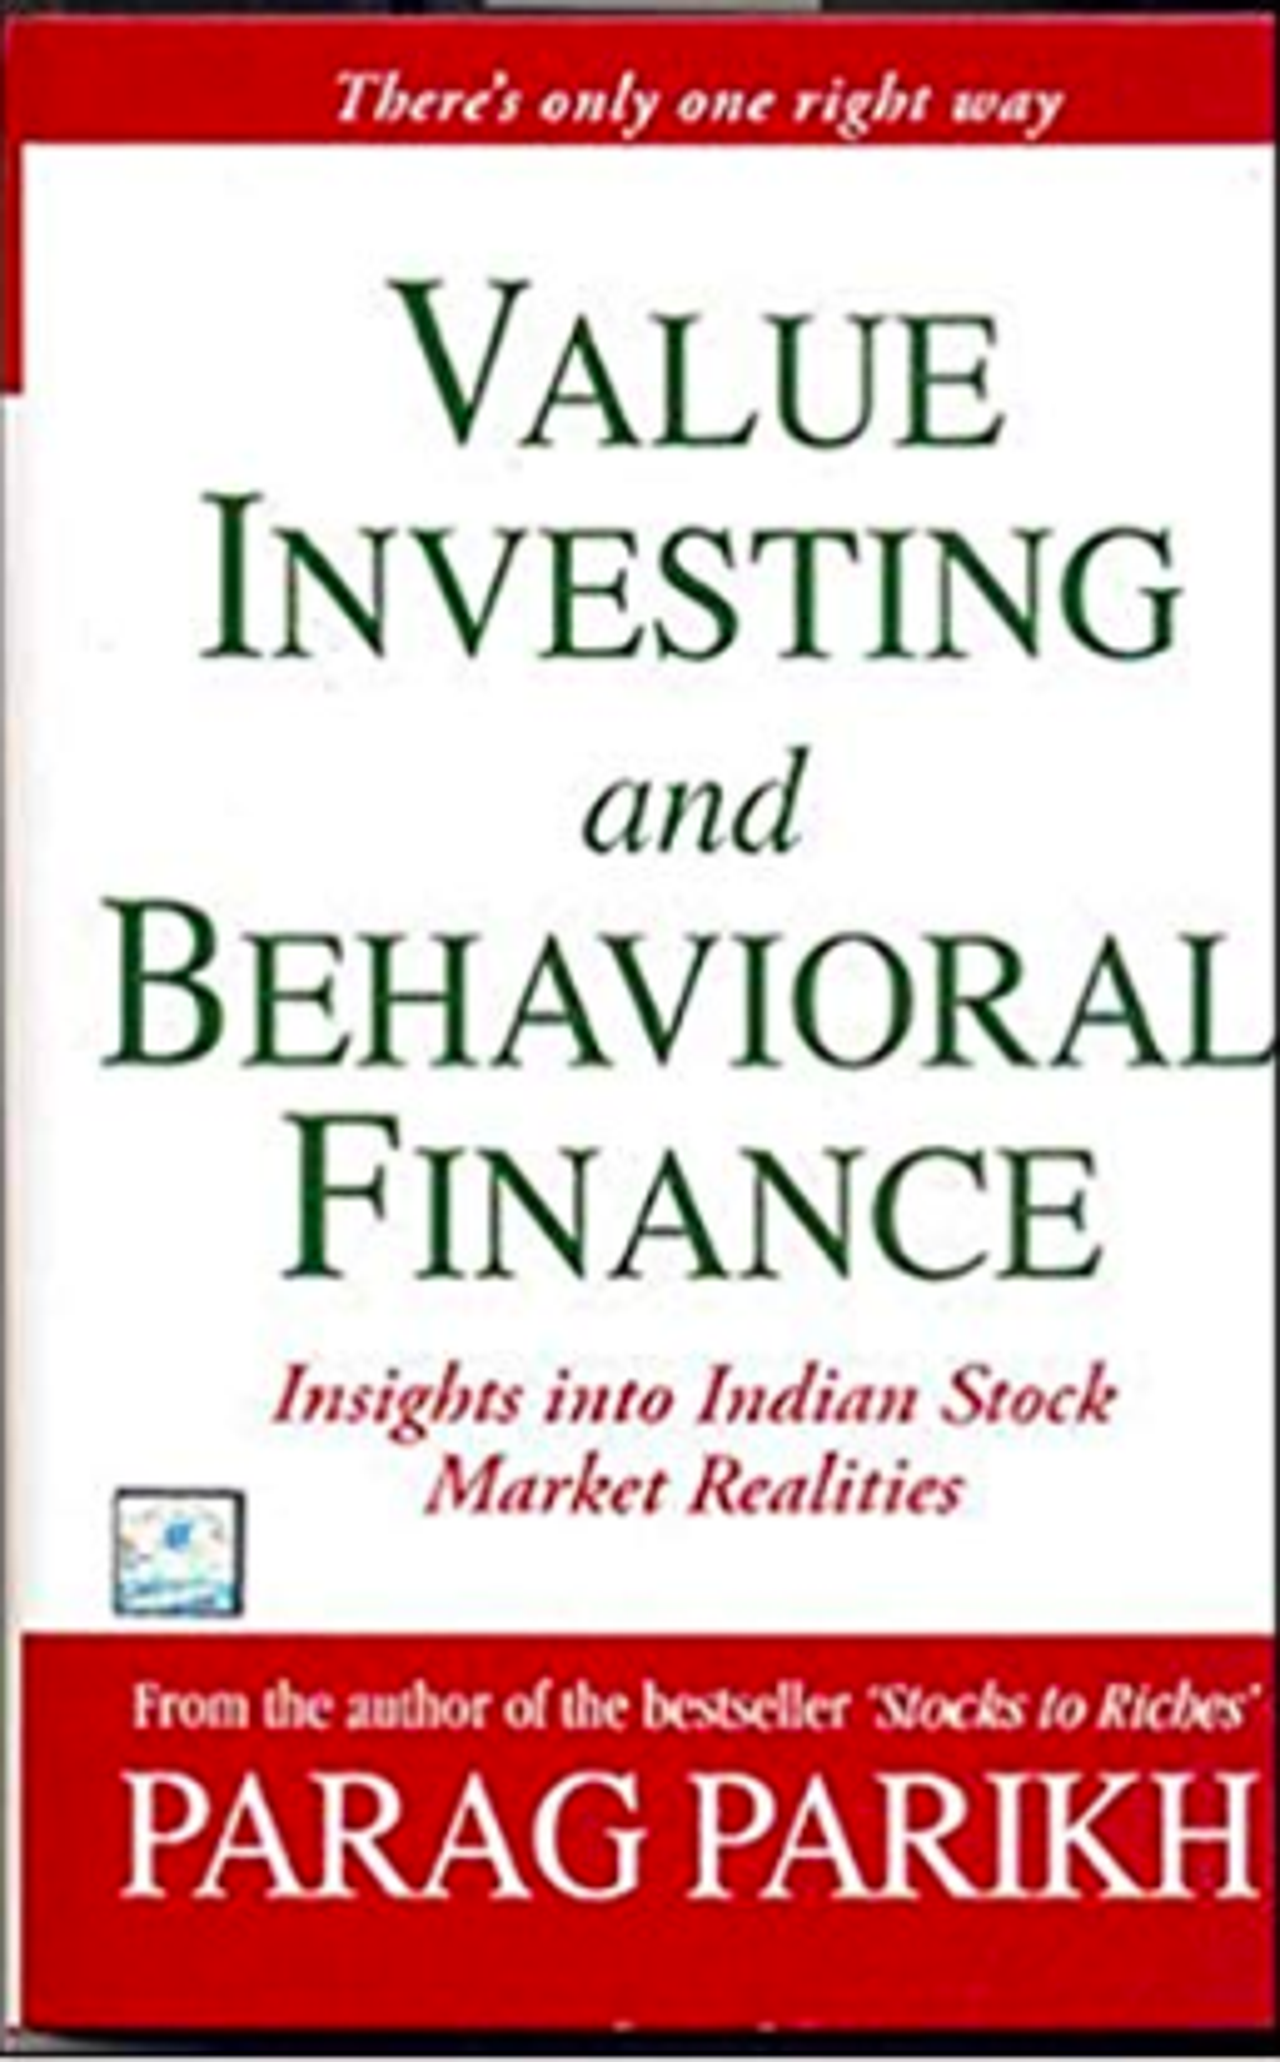 Buy Value Investing and Behavioral Finance on Amazon